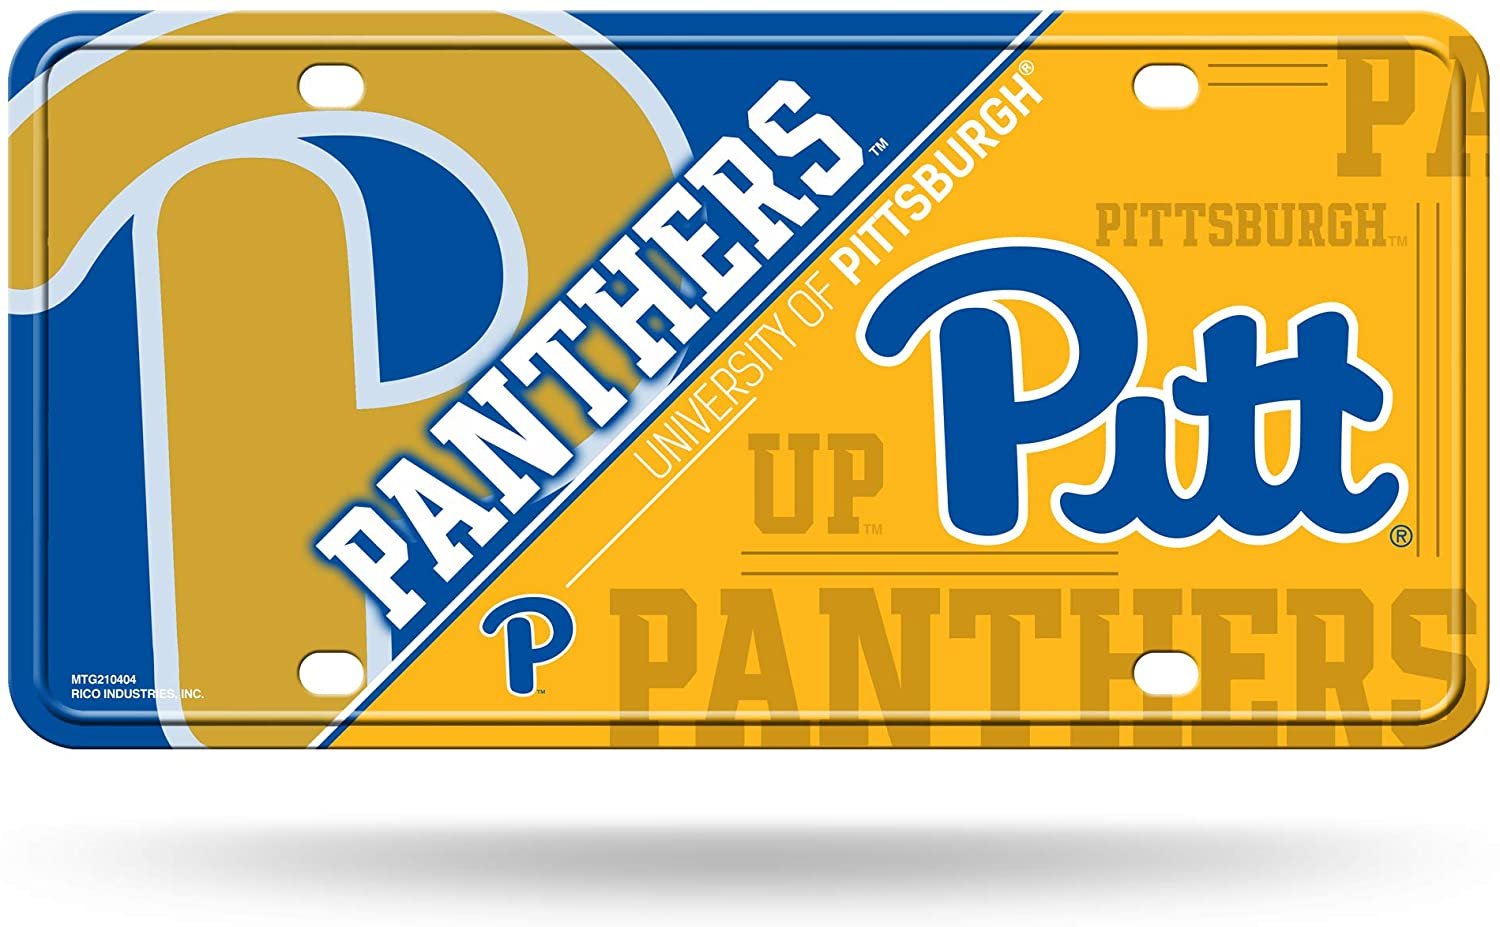 University of Pittsburgh Panthers Pitt Metal Auto Tag License Plate, Split Design, 6x12 Inch